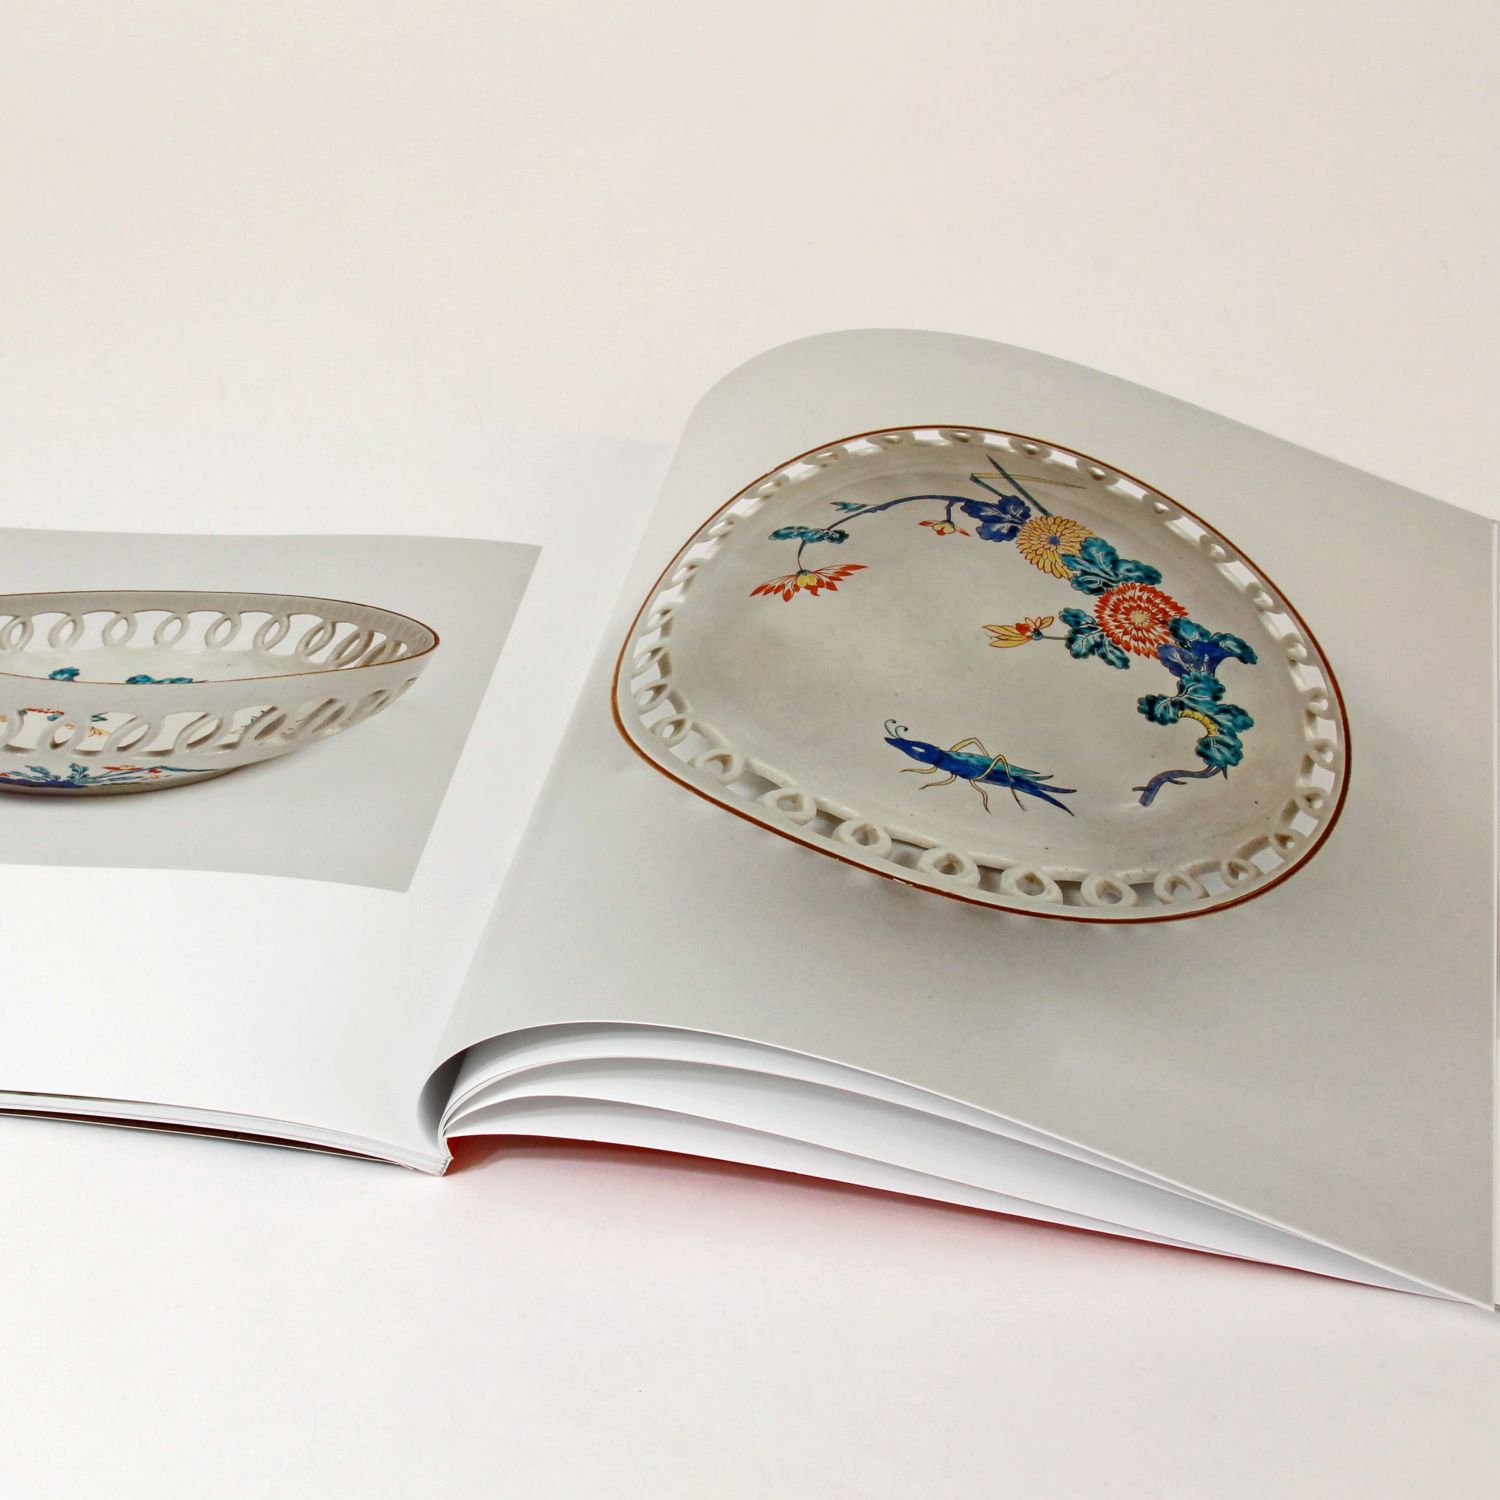 Pleasure of Collecting: Kakiemon Objects of Mutual Accommodation from the Macdonald Family Foundation Product Image 2 of 2